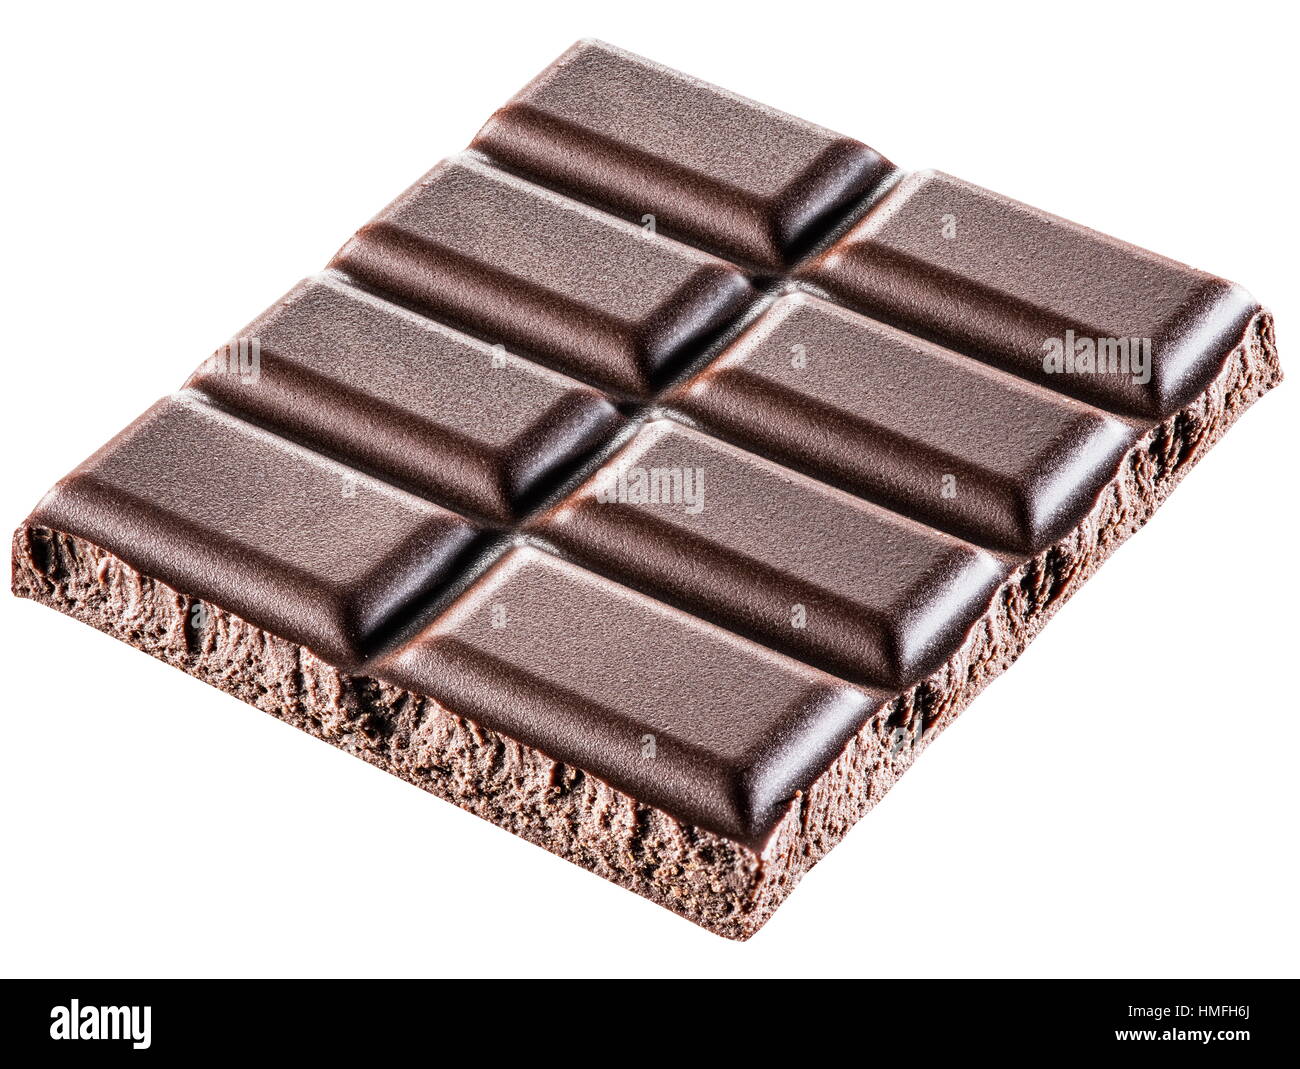 Pieces of chocolate bar. File contains clipping paths. Stock Photo